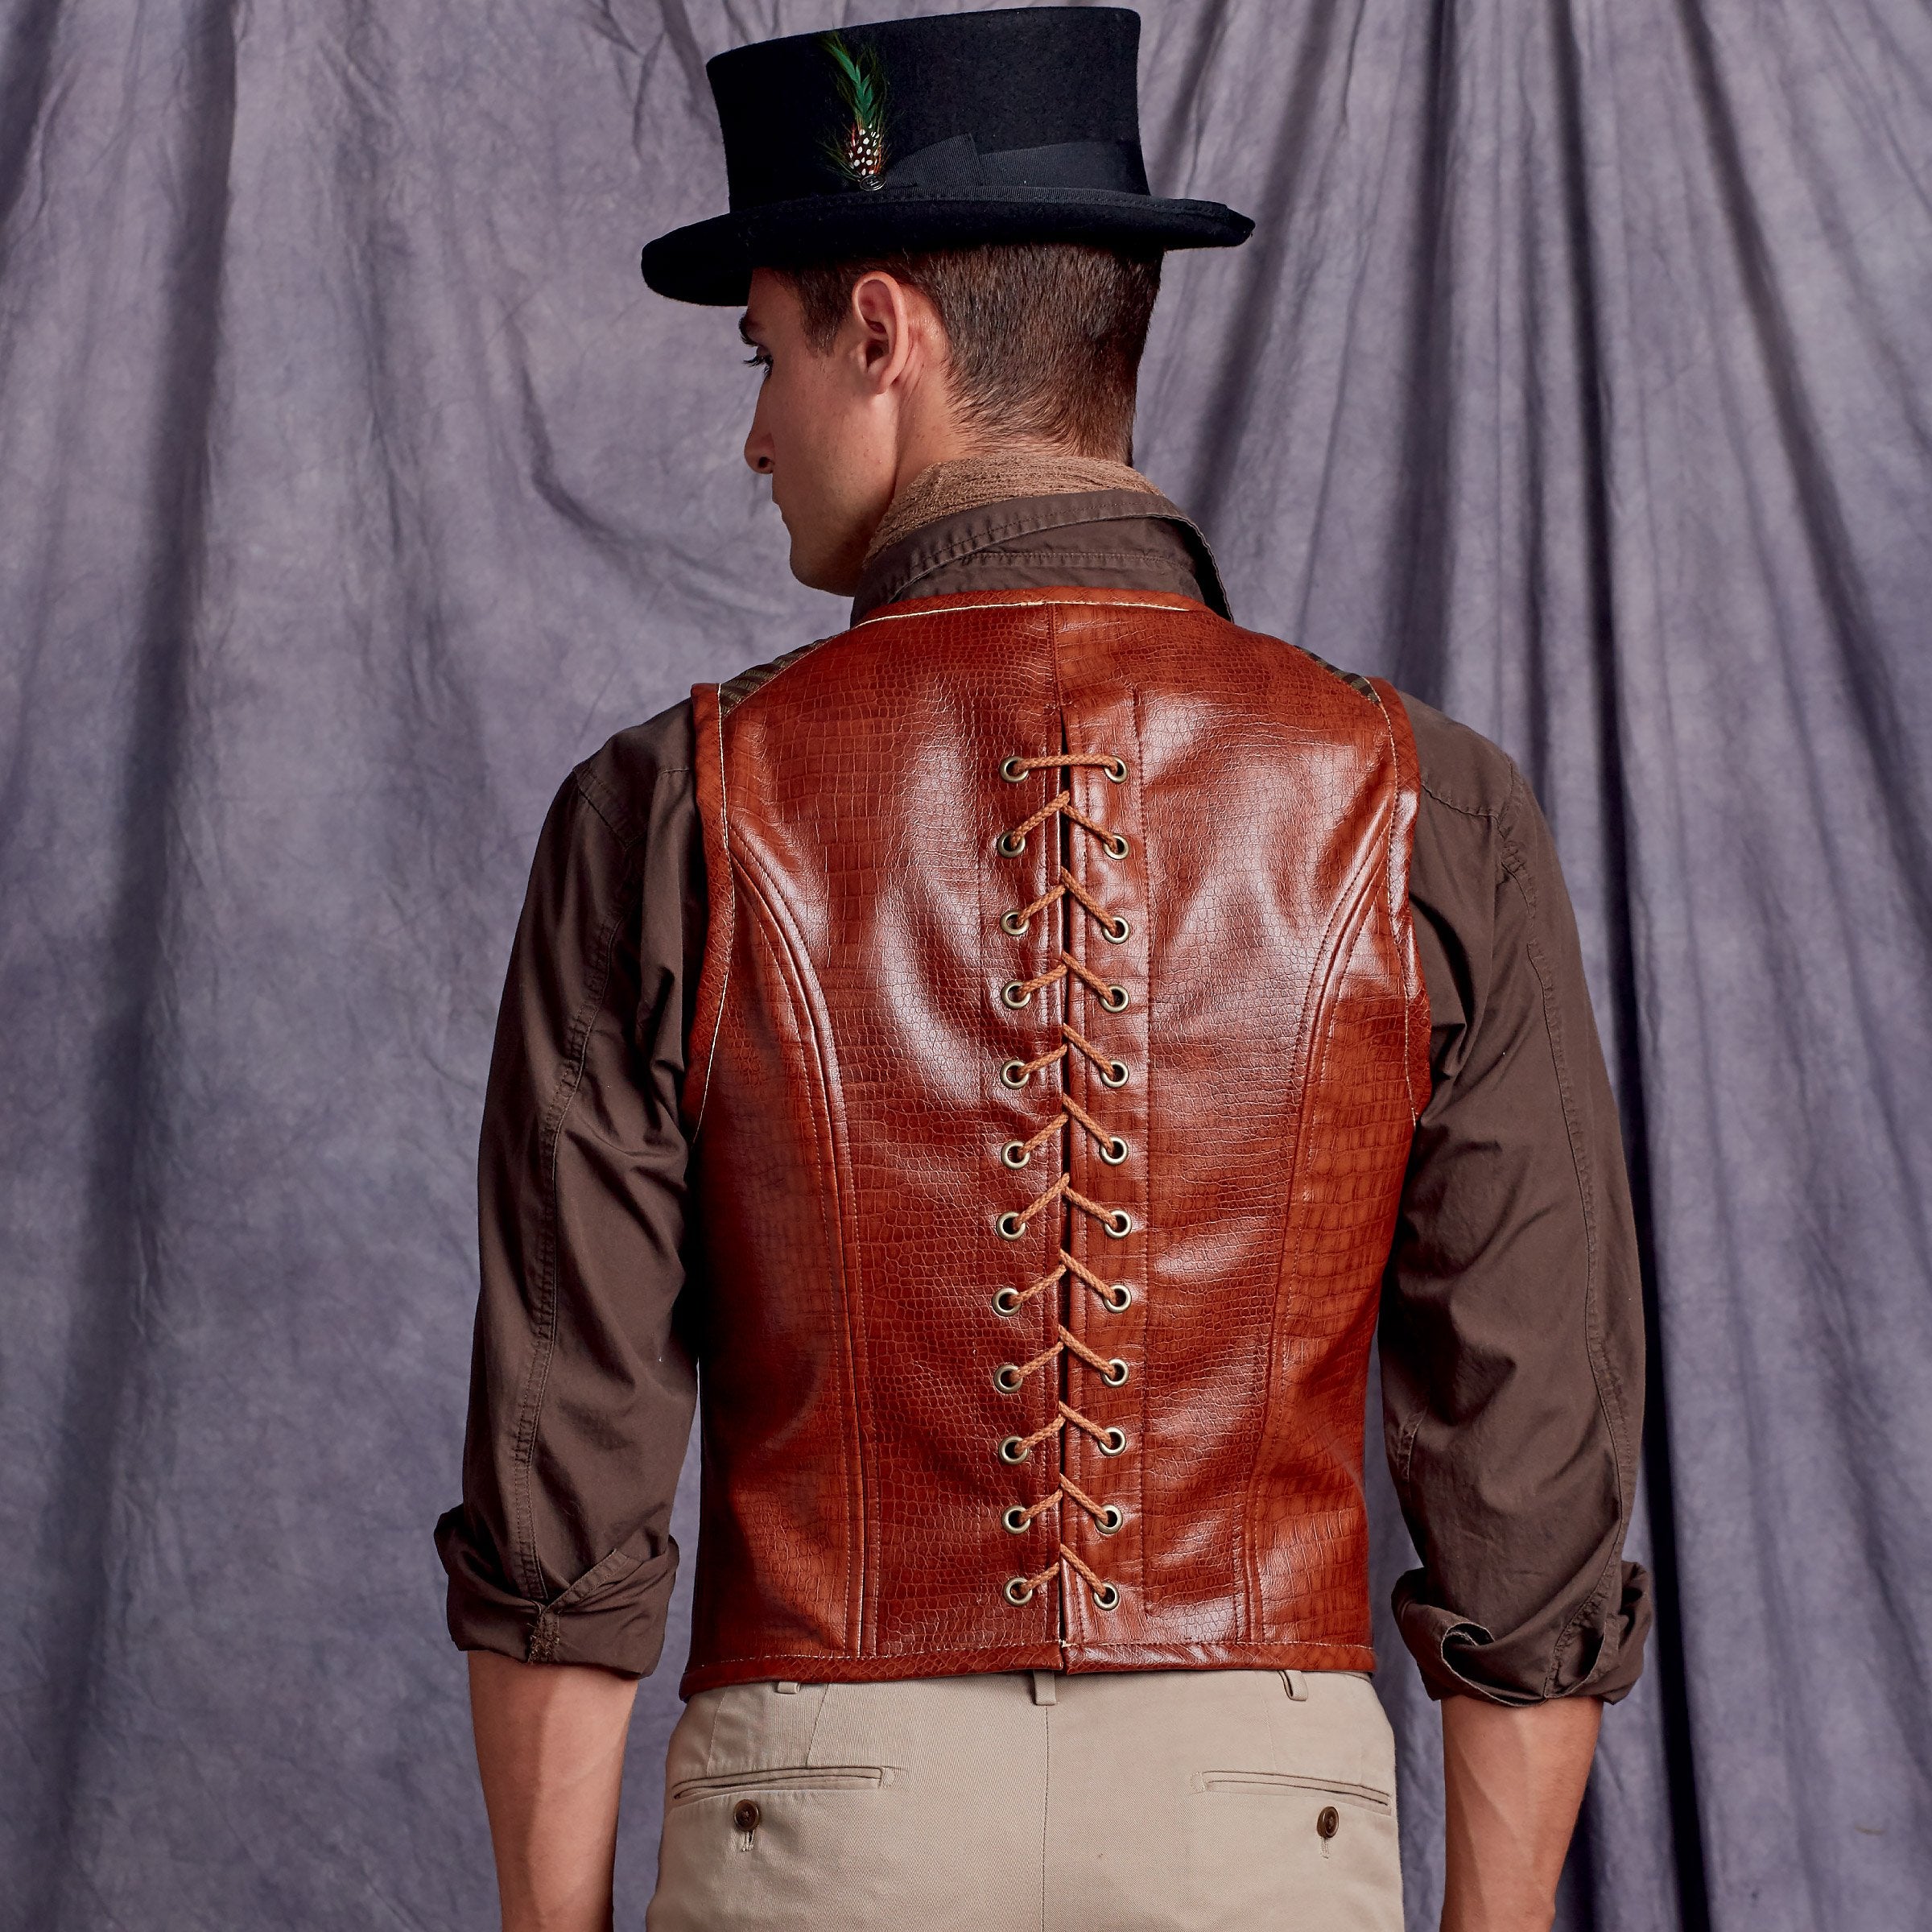 Simplicity Sewing Pattern S9087 Men's Steampunk Corset Waistcoats from Jaycotts Sewing Supplies